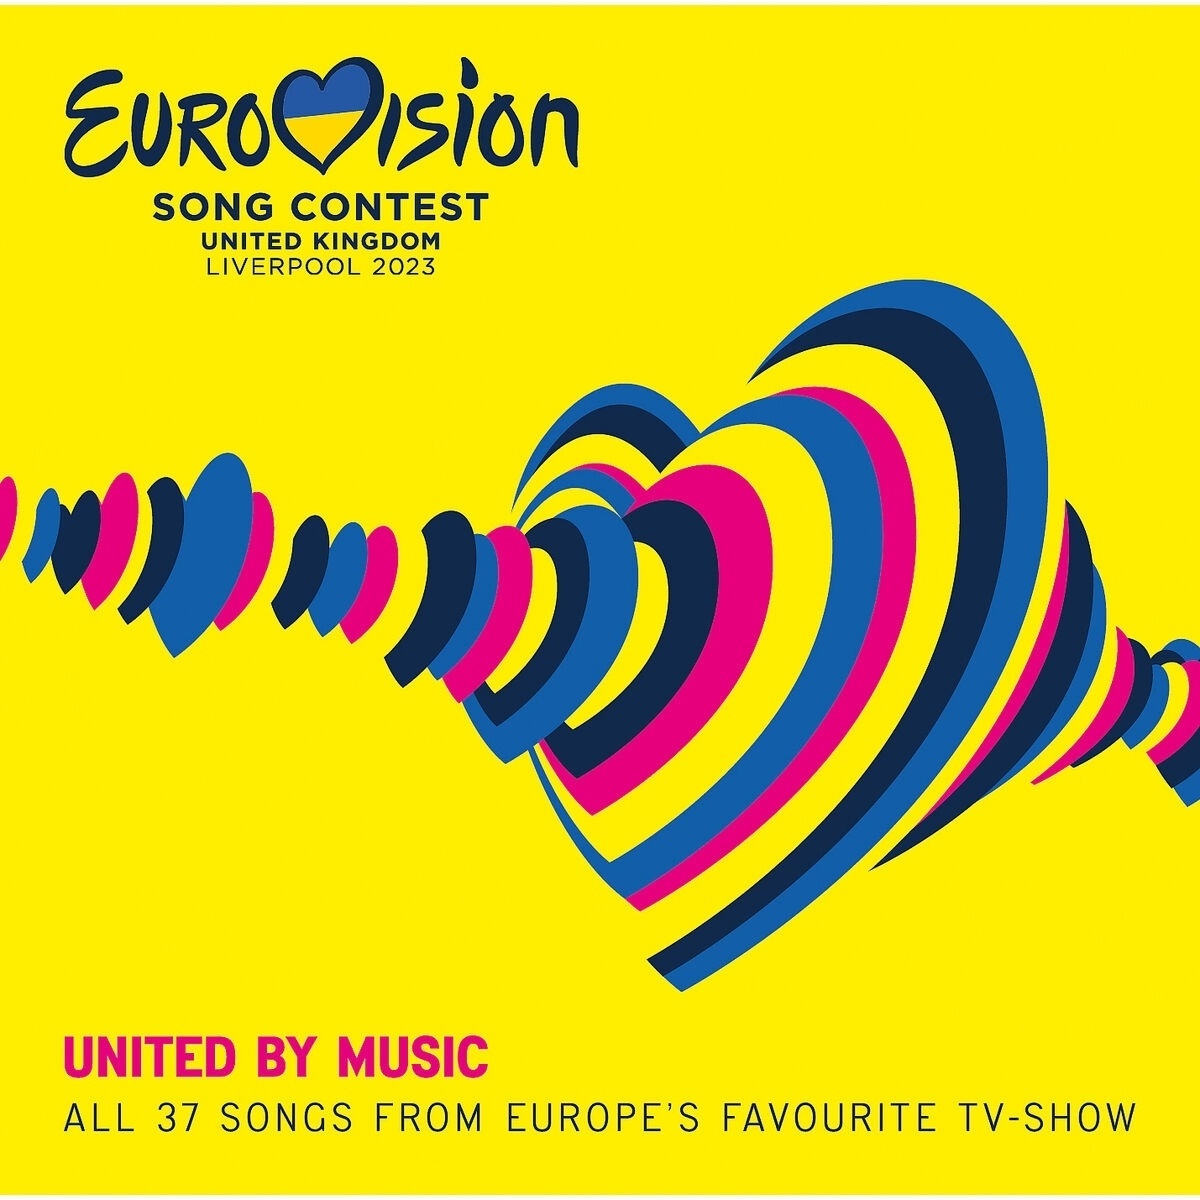 Eurovision Song Contest Liverpool 2023 (2 CDs) - Various. (CD)